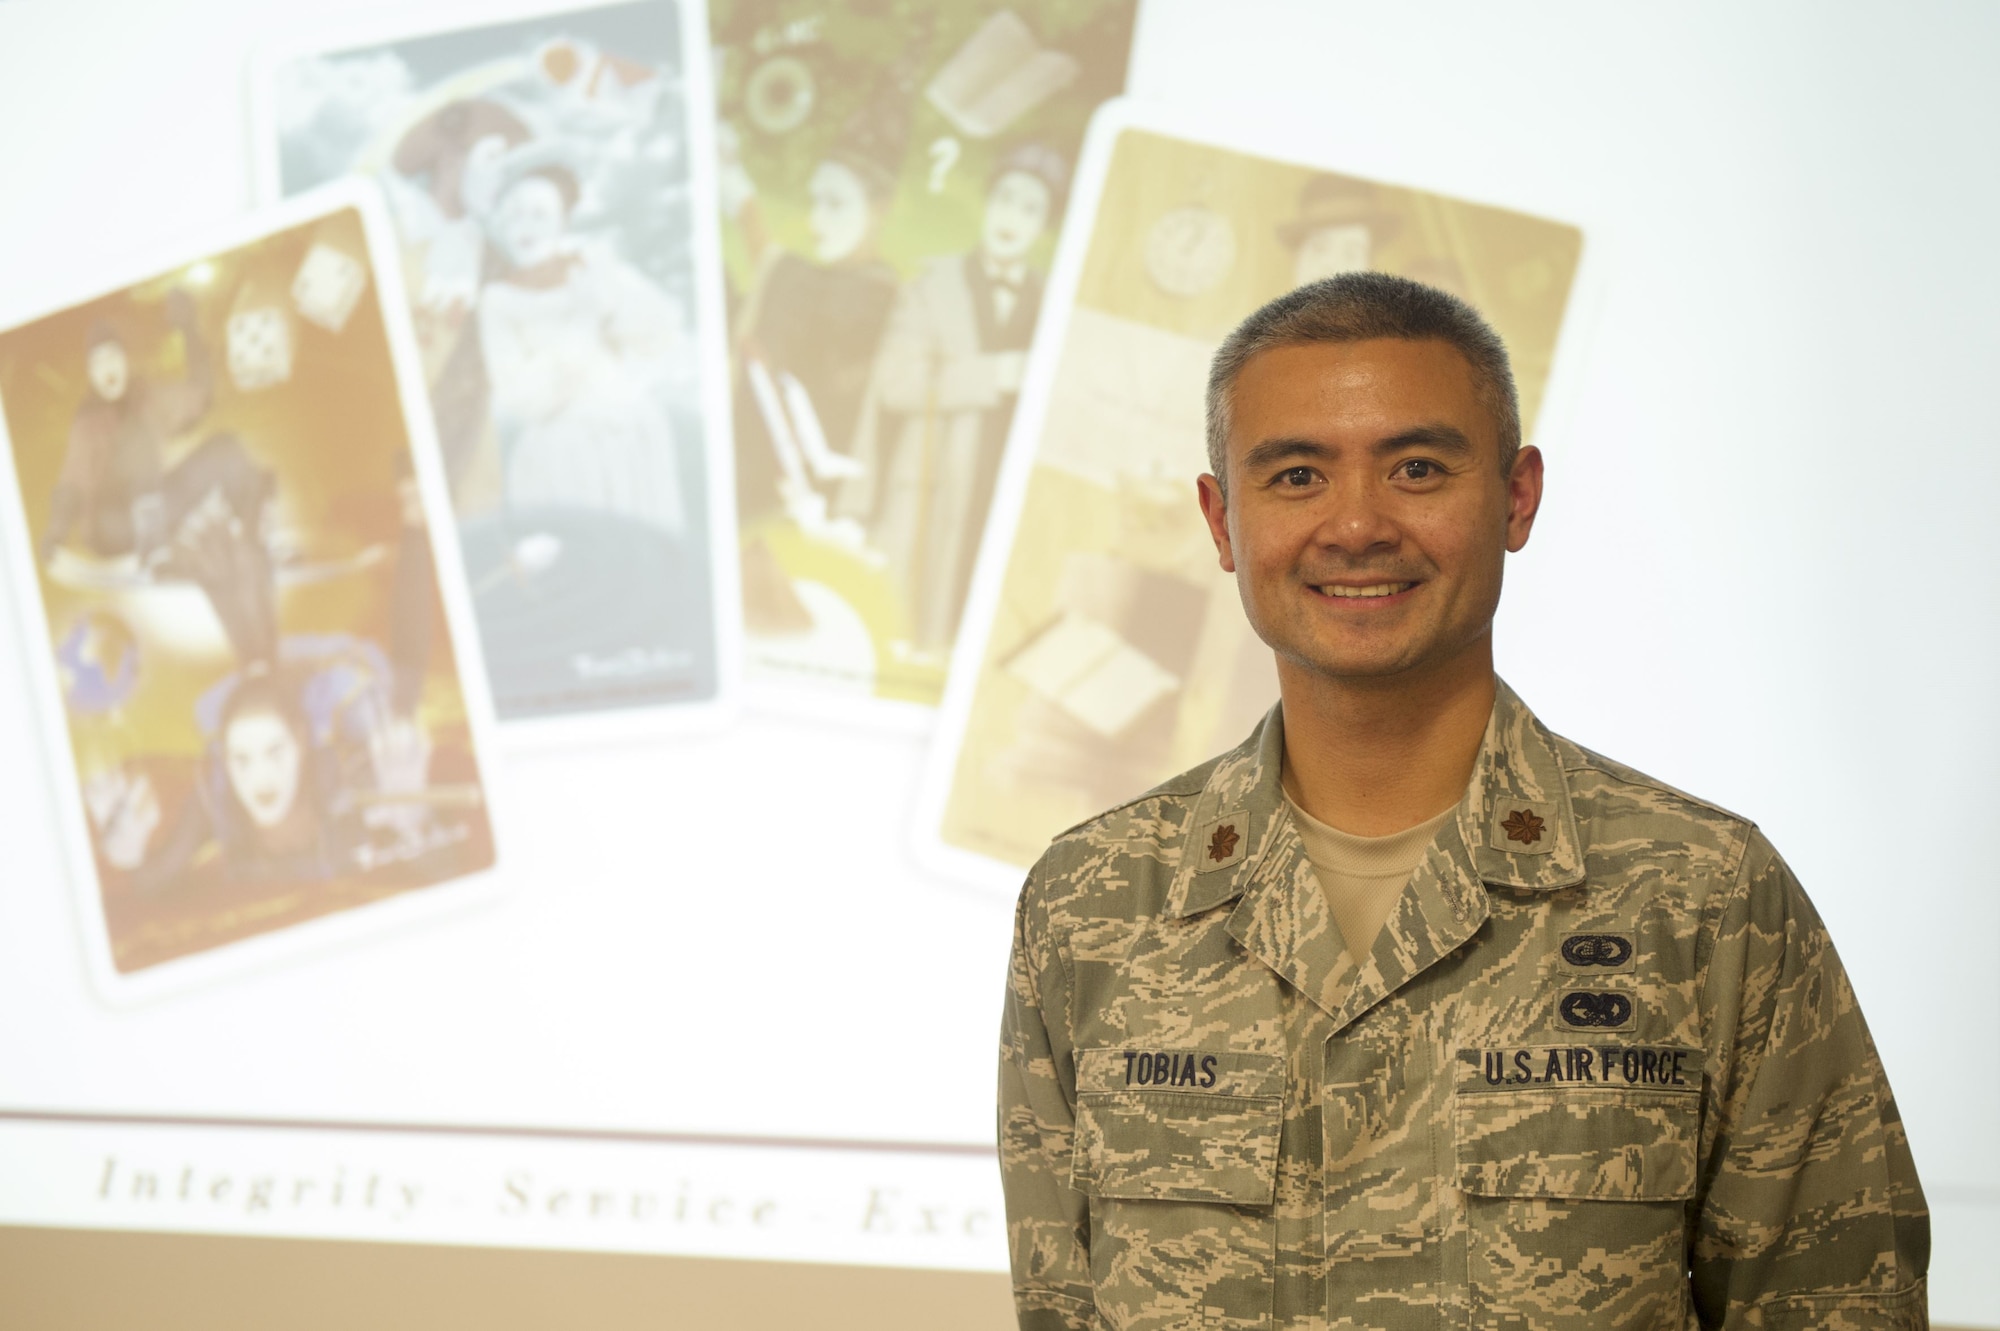 Maj. Francis J. Tobias, director of Equal Opportunity for the 940th Air Refueling Wing, poses for a photo Dec. 3 at Beale Air Force Base, California.